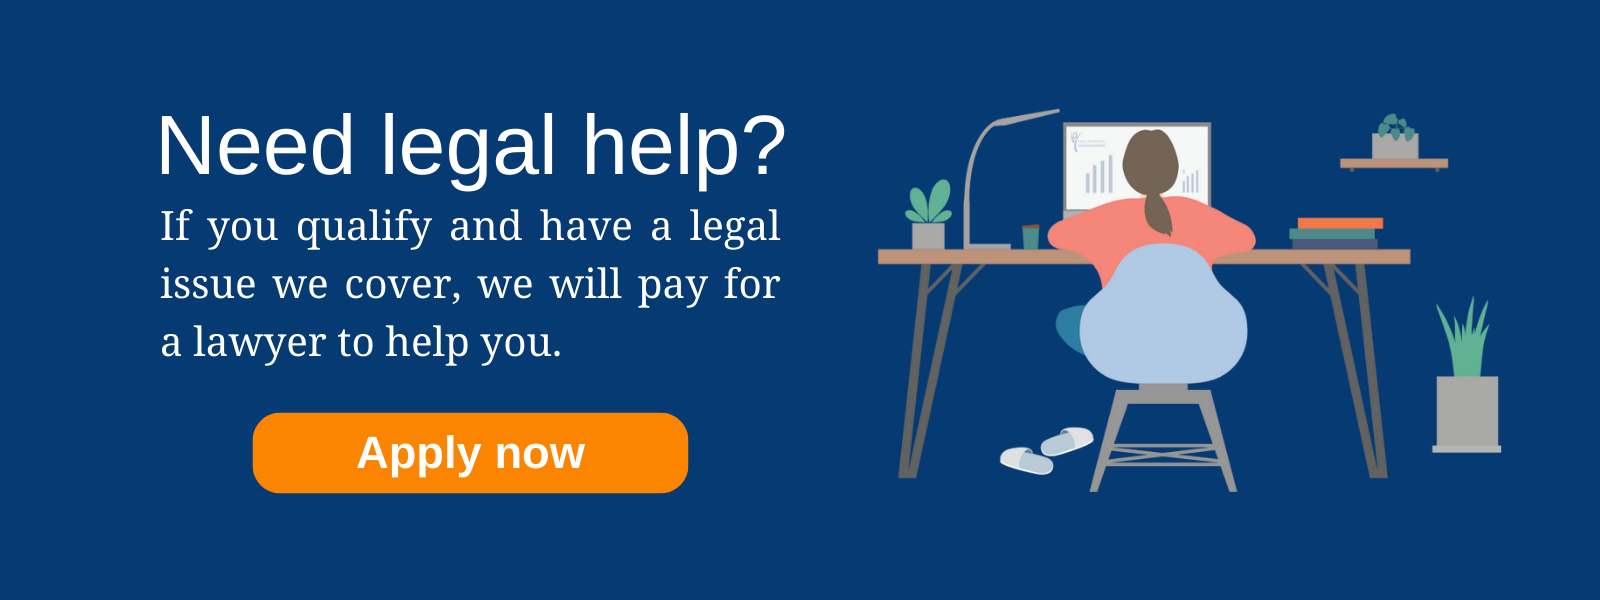 Need legal help? If you qualify and have a legal issue we cover, we will pay for a lawyer to help you.